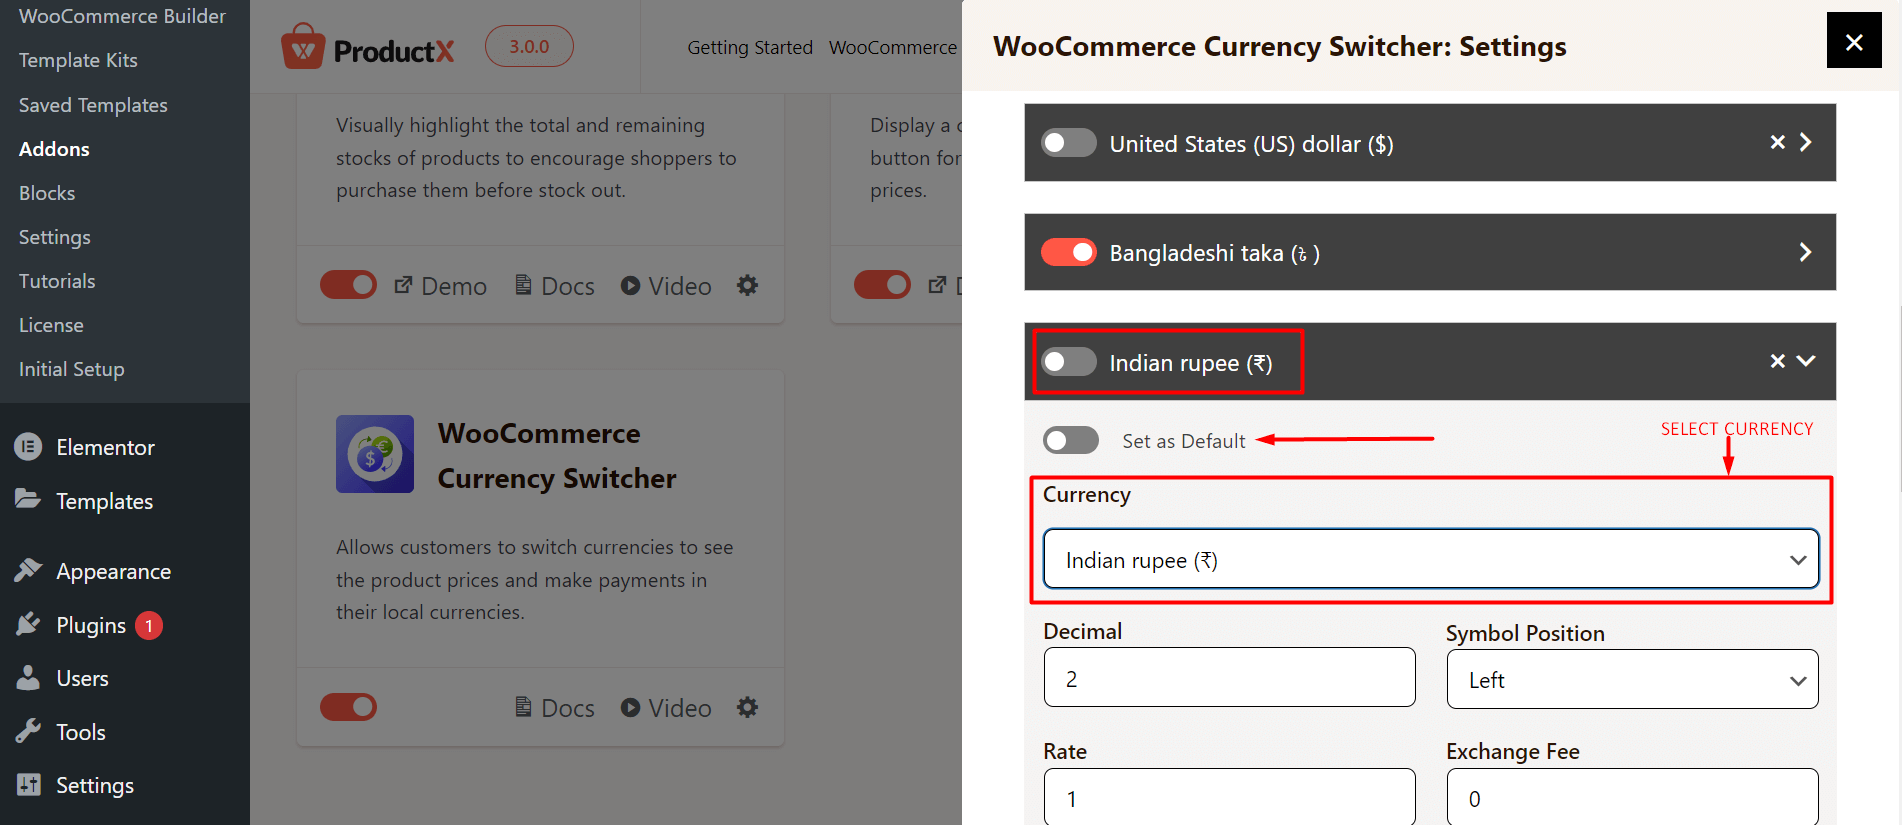 Change Currency within Currency Switcher Settings